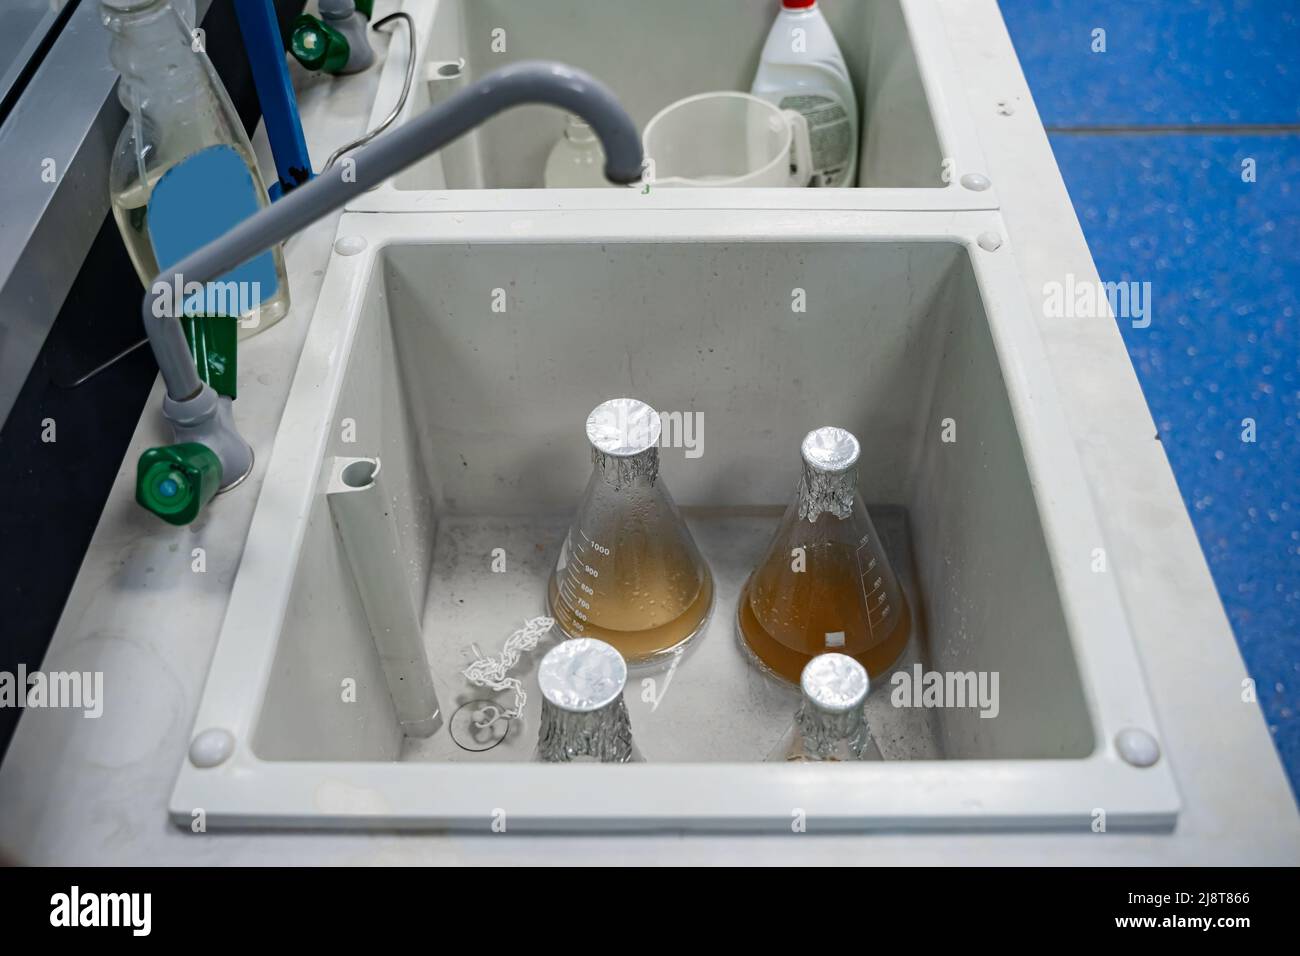 Large flasks with residual chemical materials stand in the sink. Dirty or contaminated laboratory glassware Stock Photo